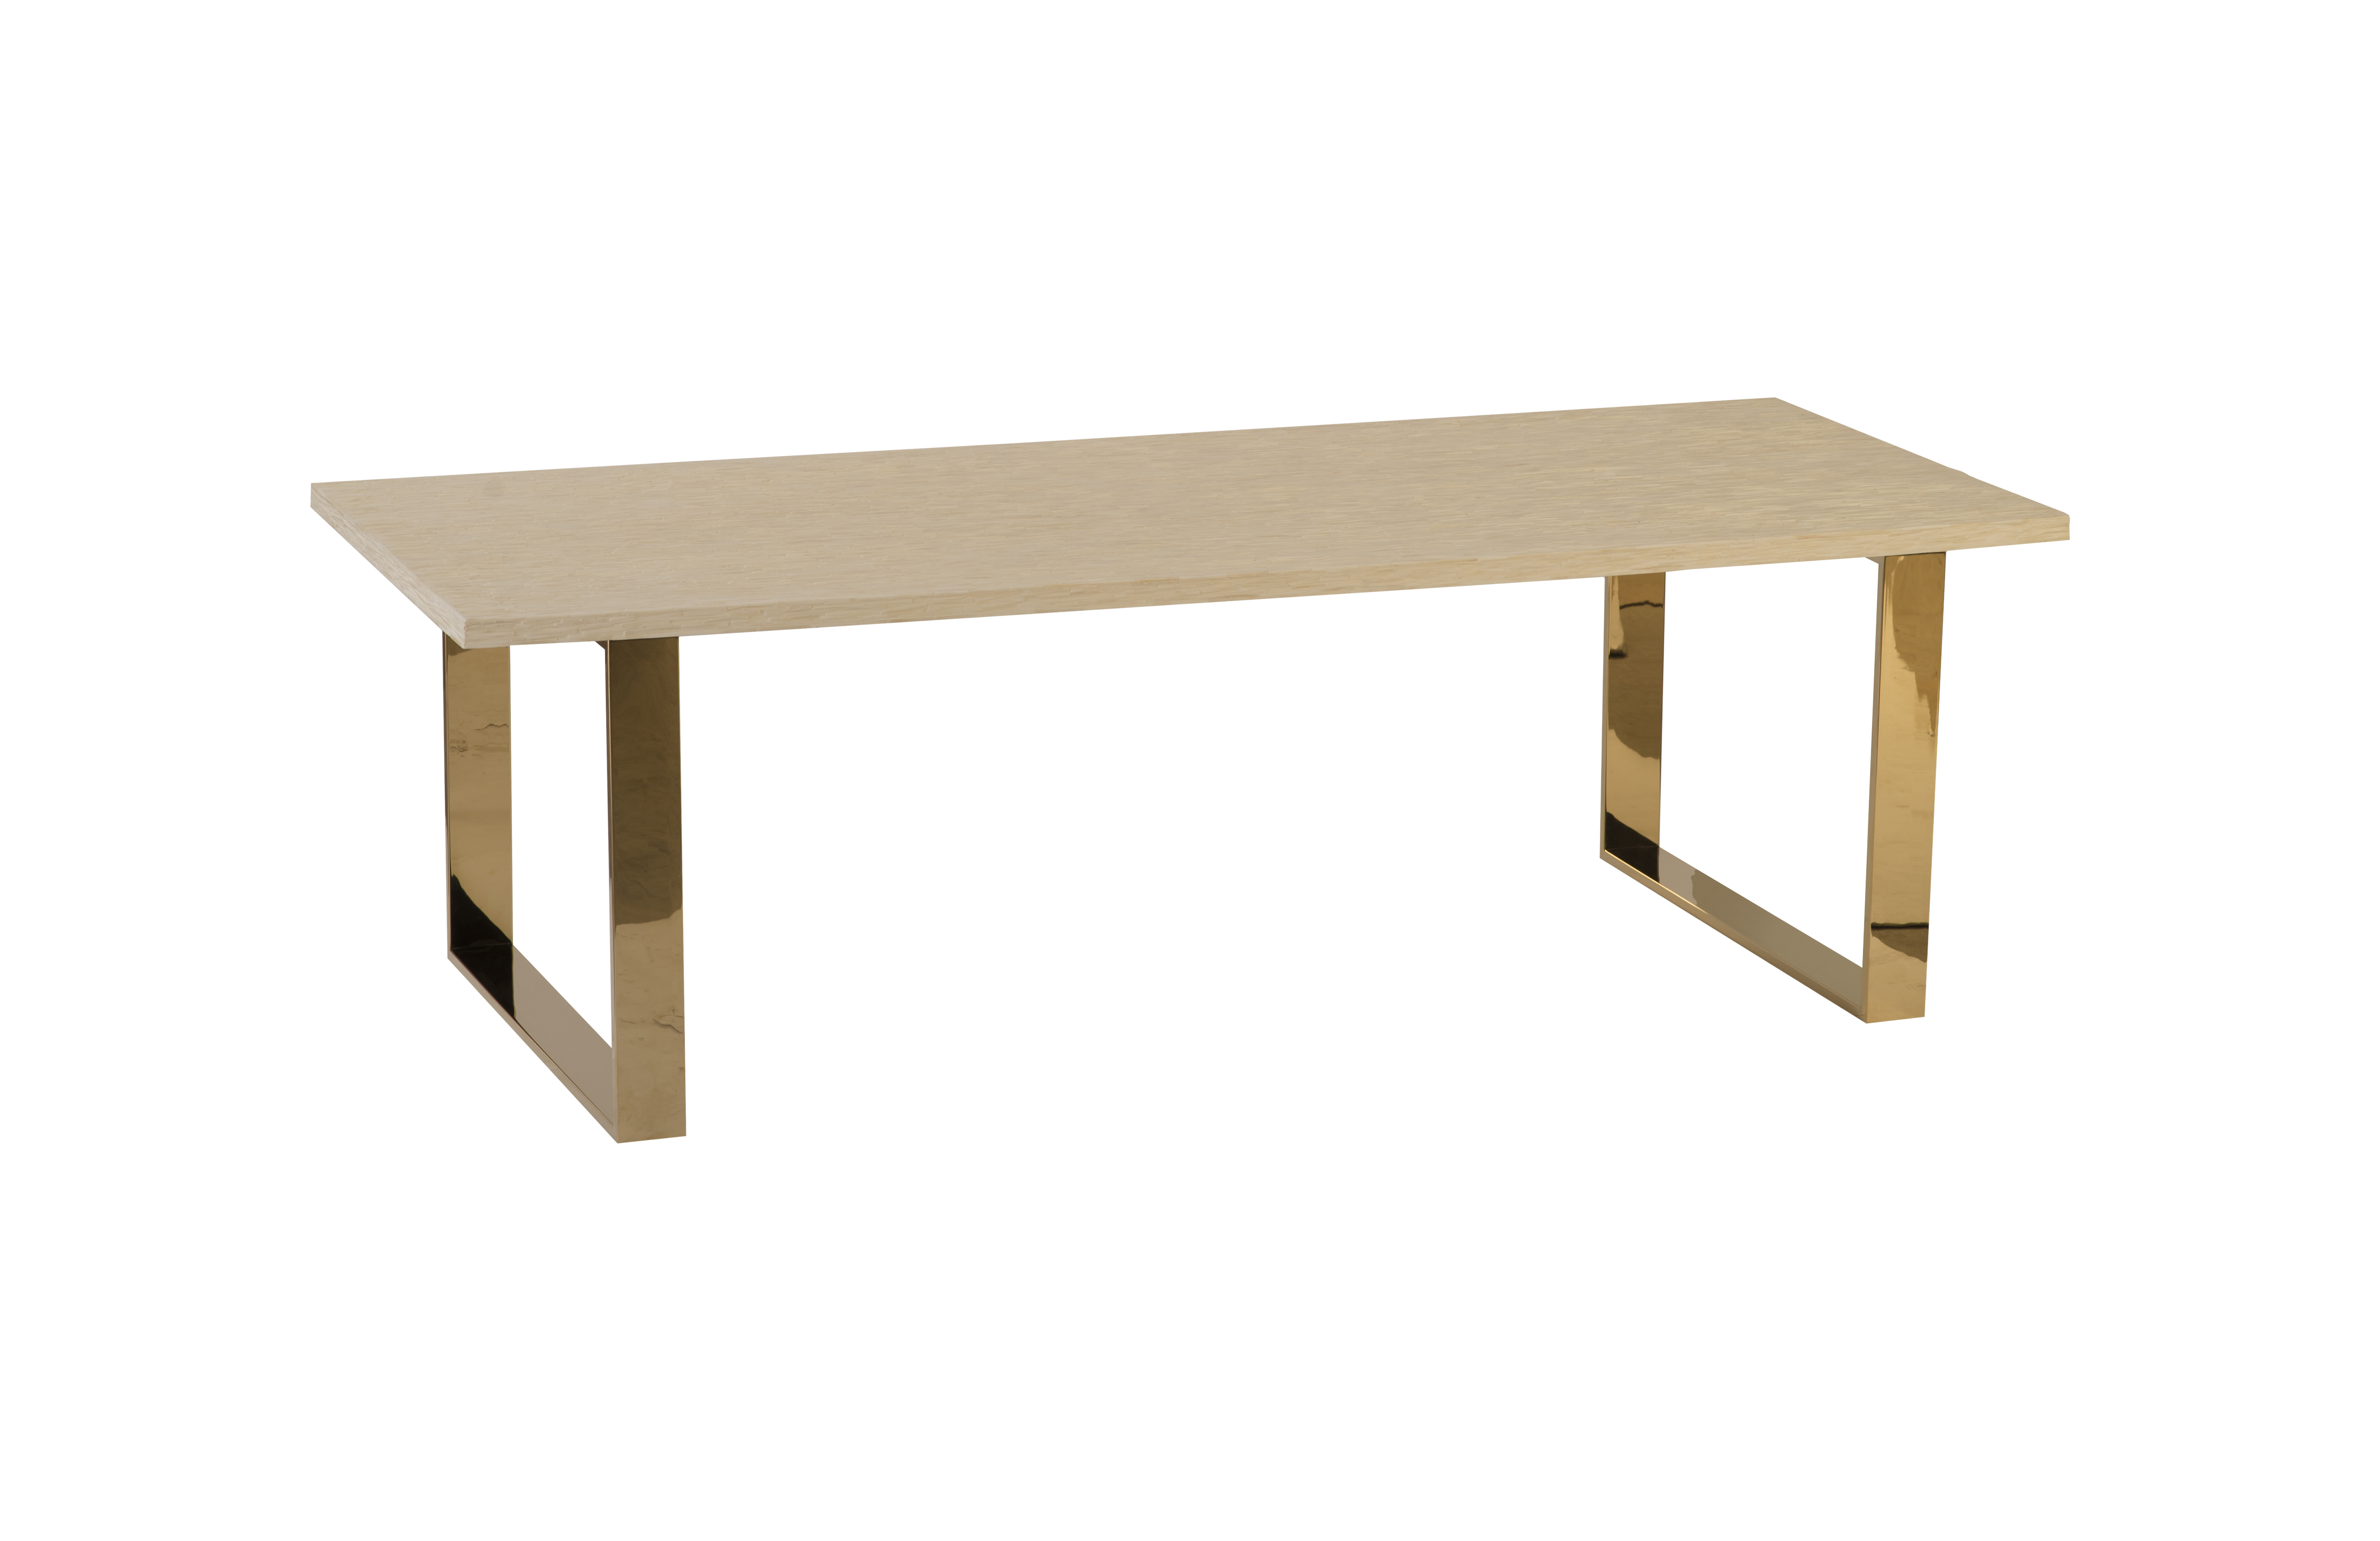 Phillips Collection Atlantic dining table